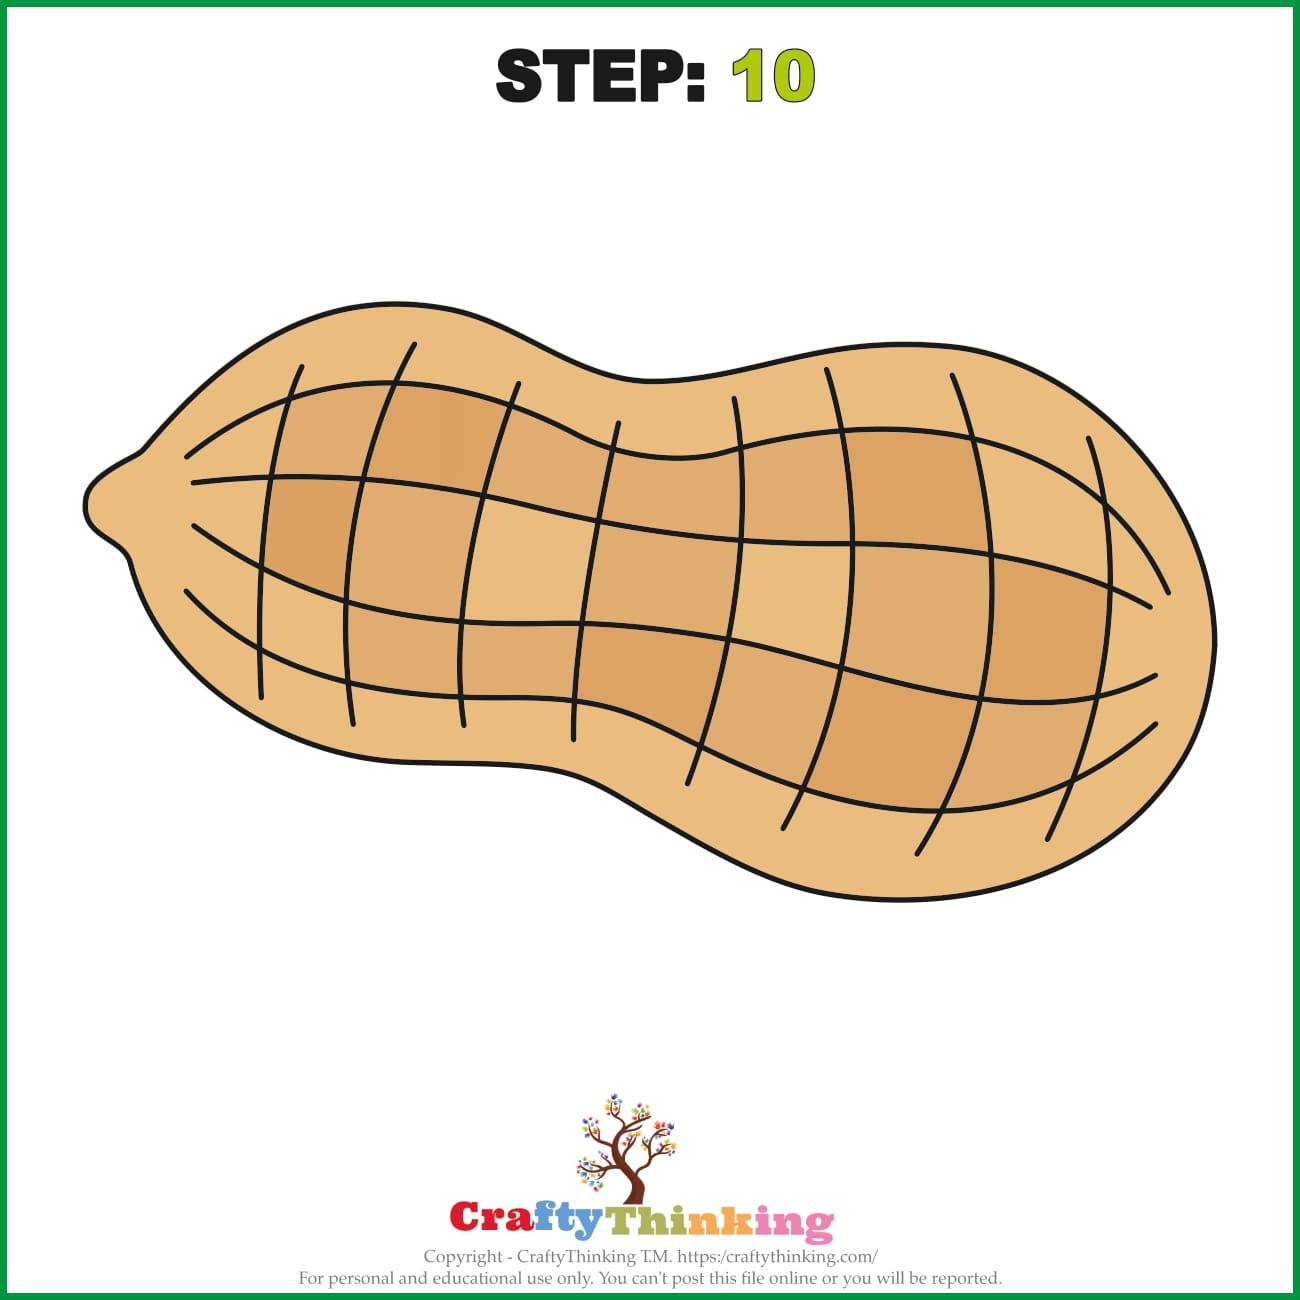 How to Draw a Peanut Step by Step with Free Peanut Printable